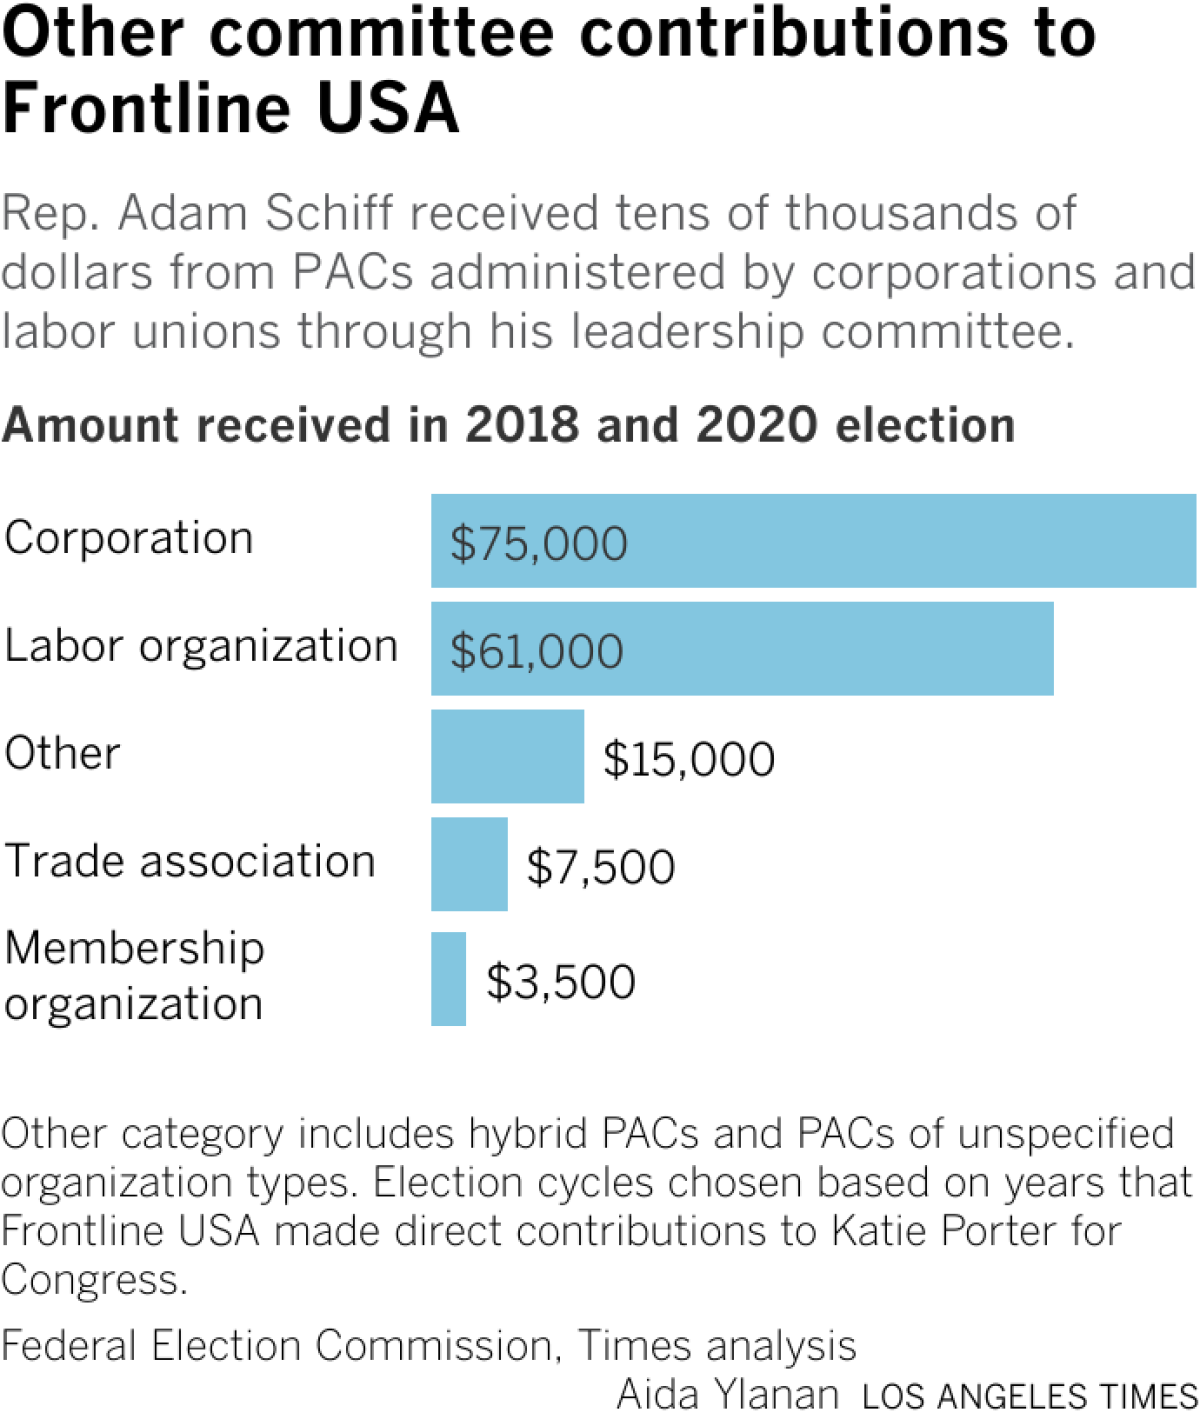 Rep. Adam Schiff received tens of thousands of dollars from PACs administered by corporations and labor unions through his leadership committee.